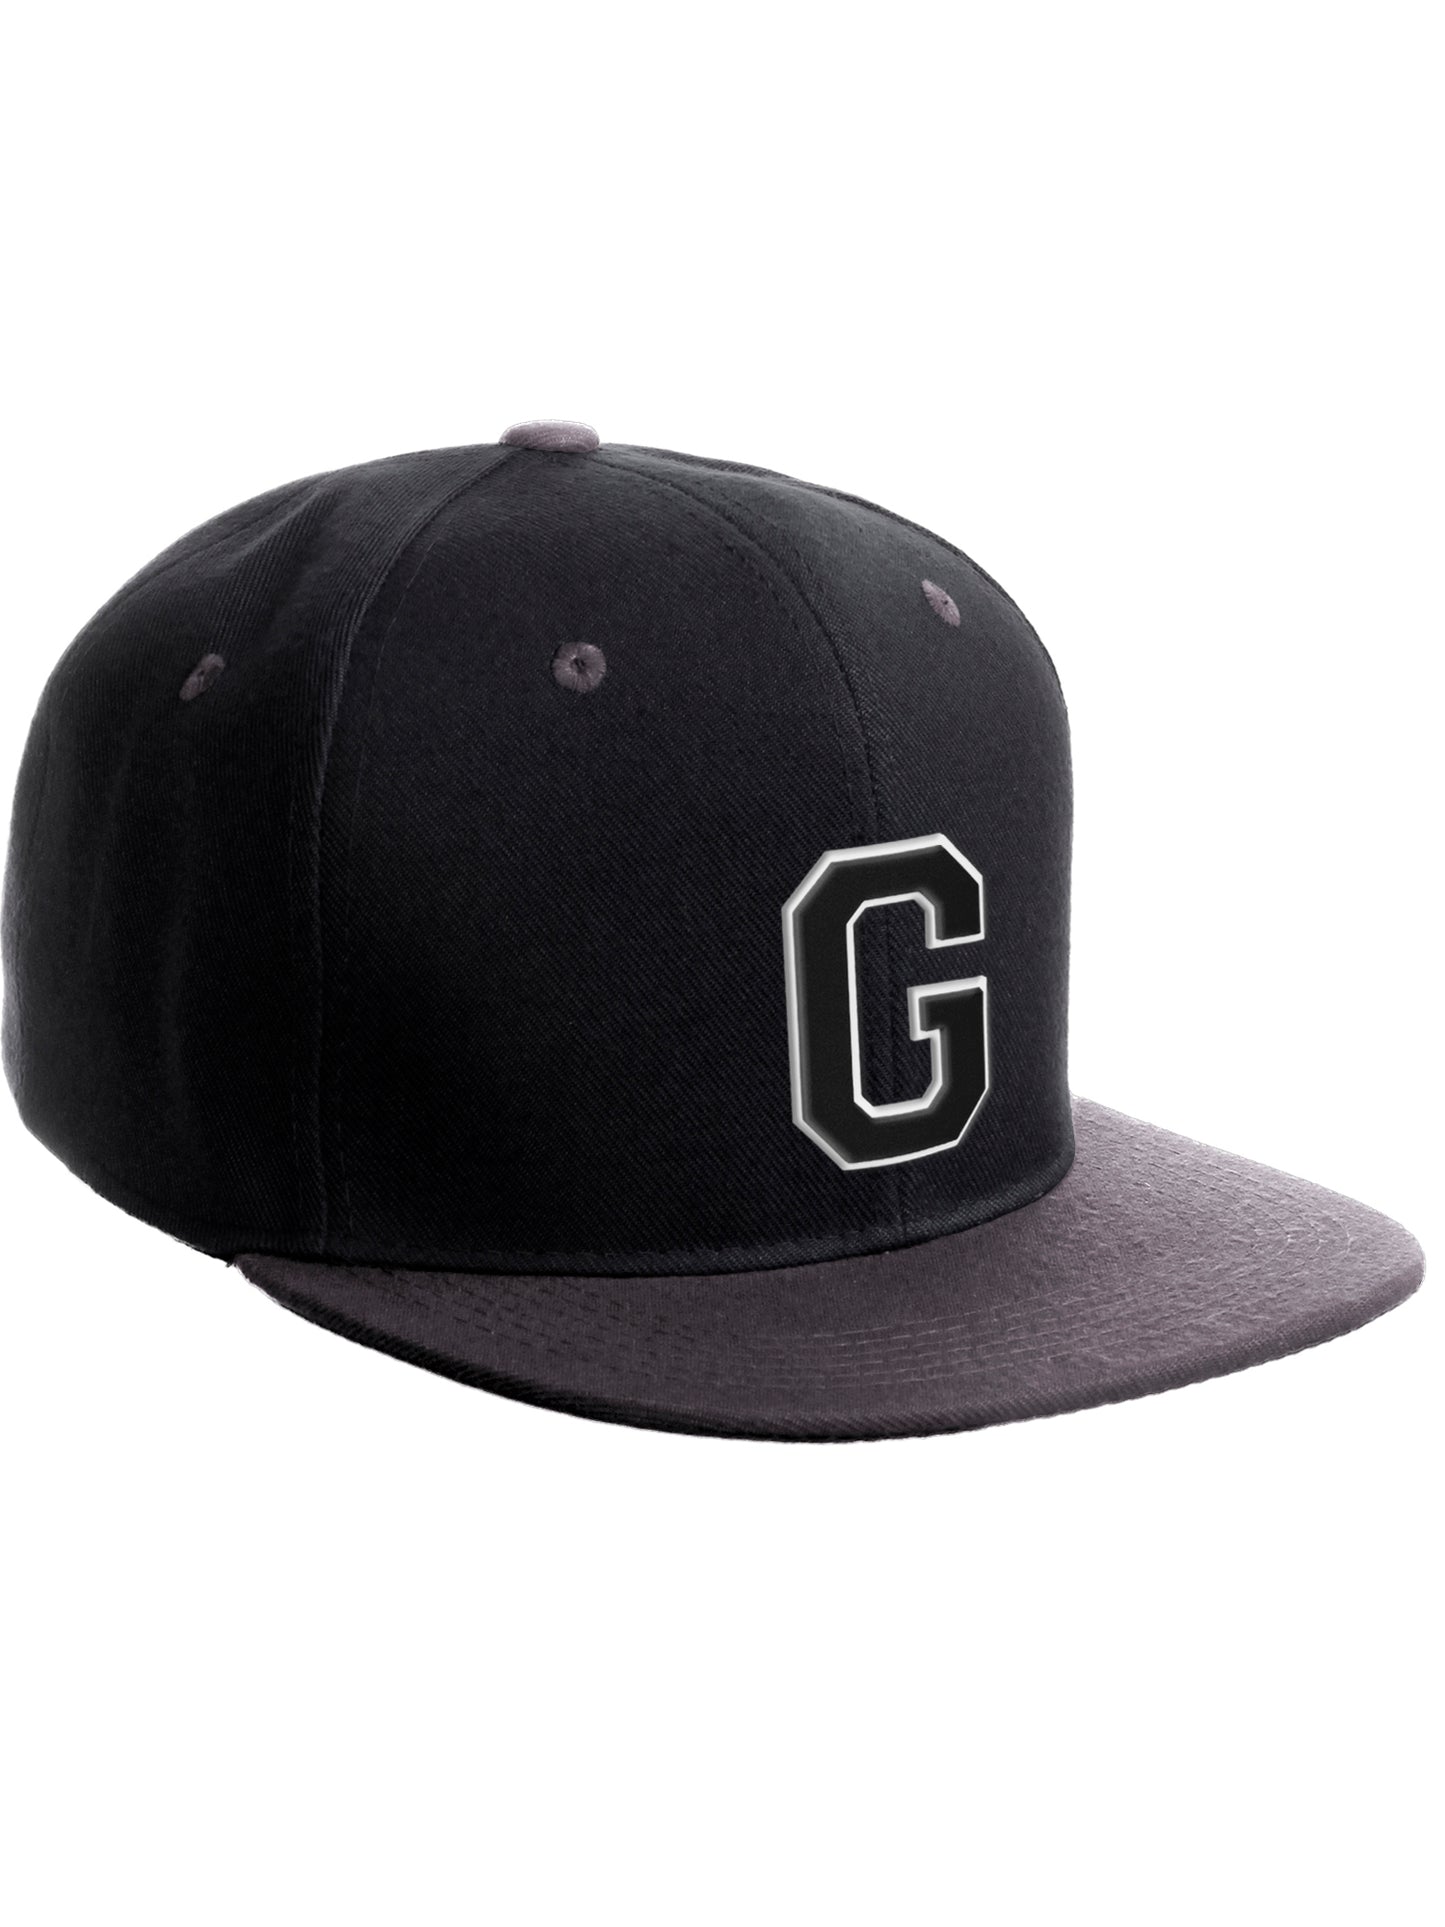 Classic Snapback Hat Custom A to Z Initial Letters, Black Charcoal Cap Wht Blk